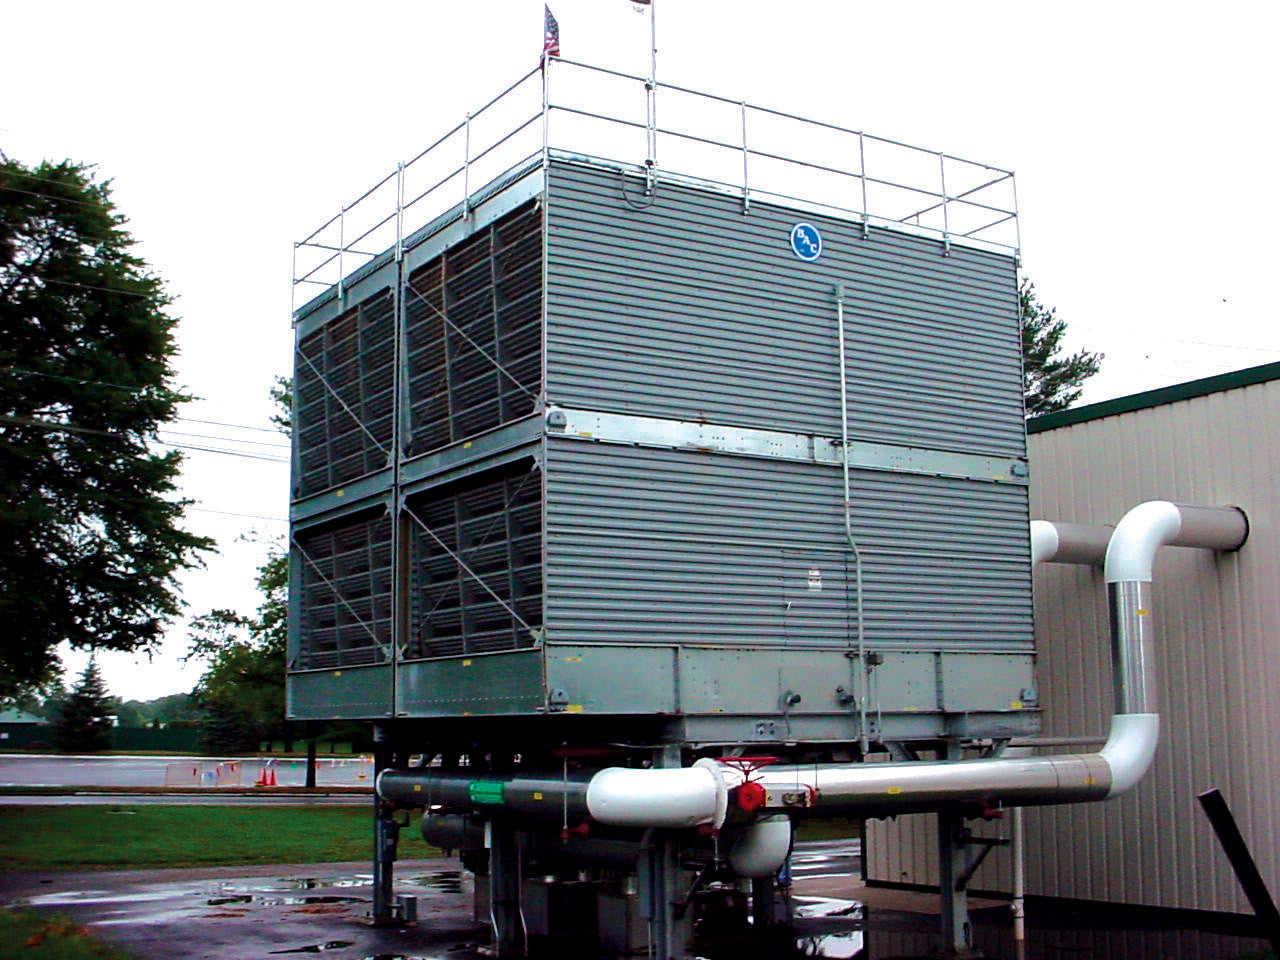 Fundamental cooling tower issue